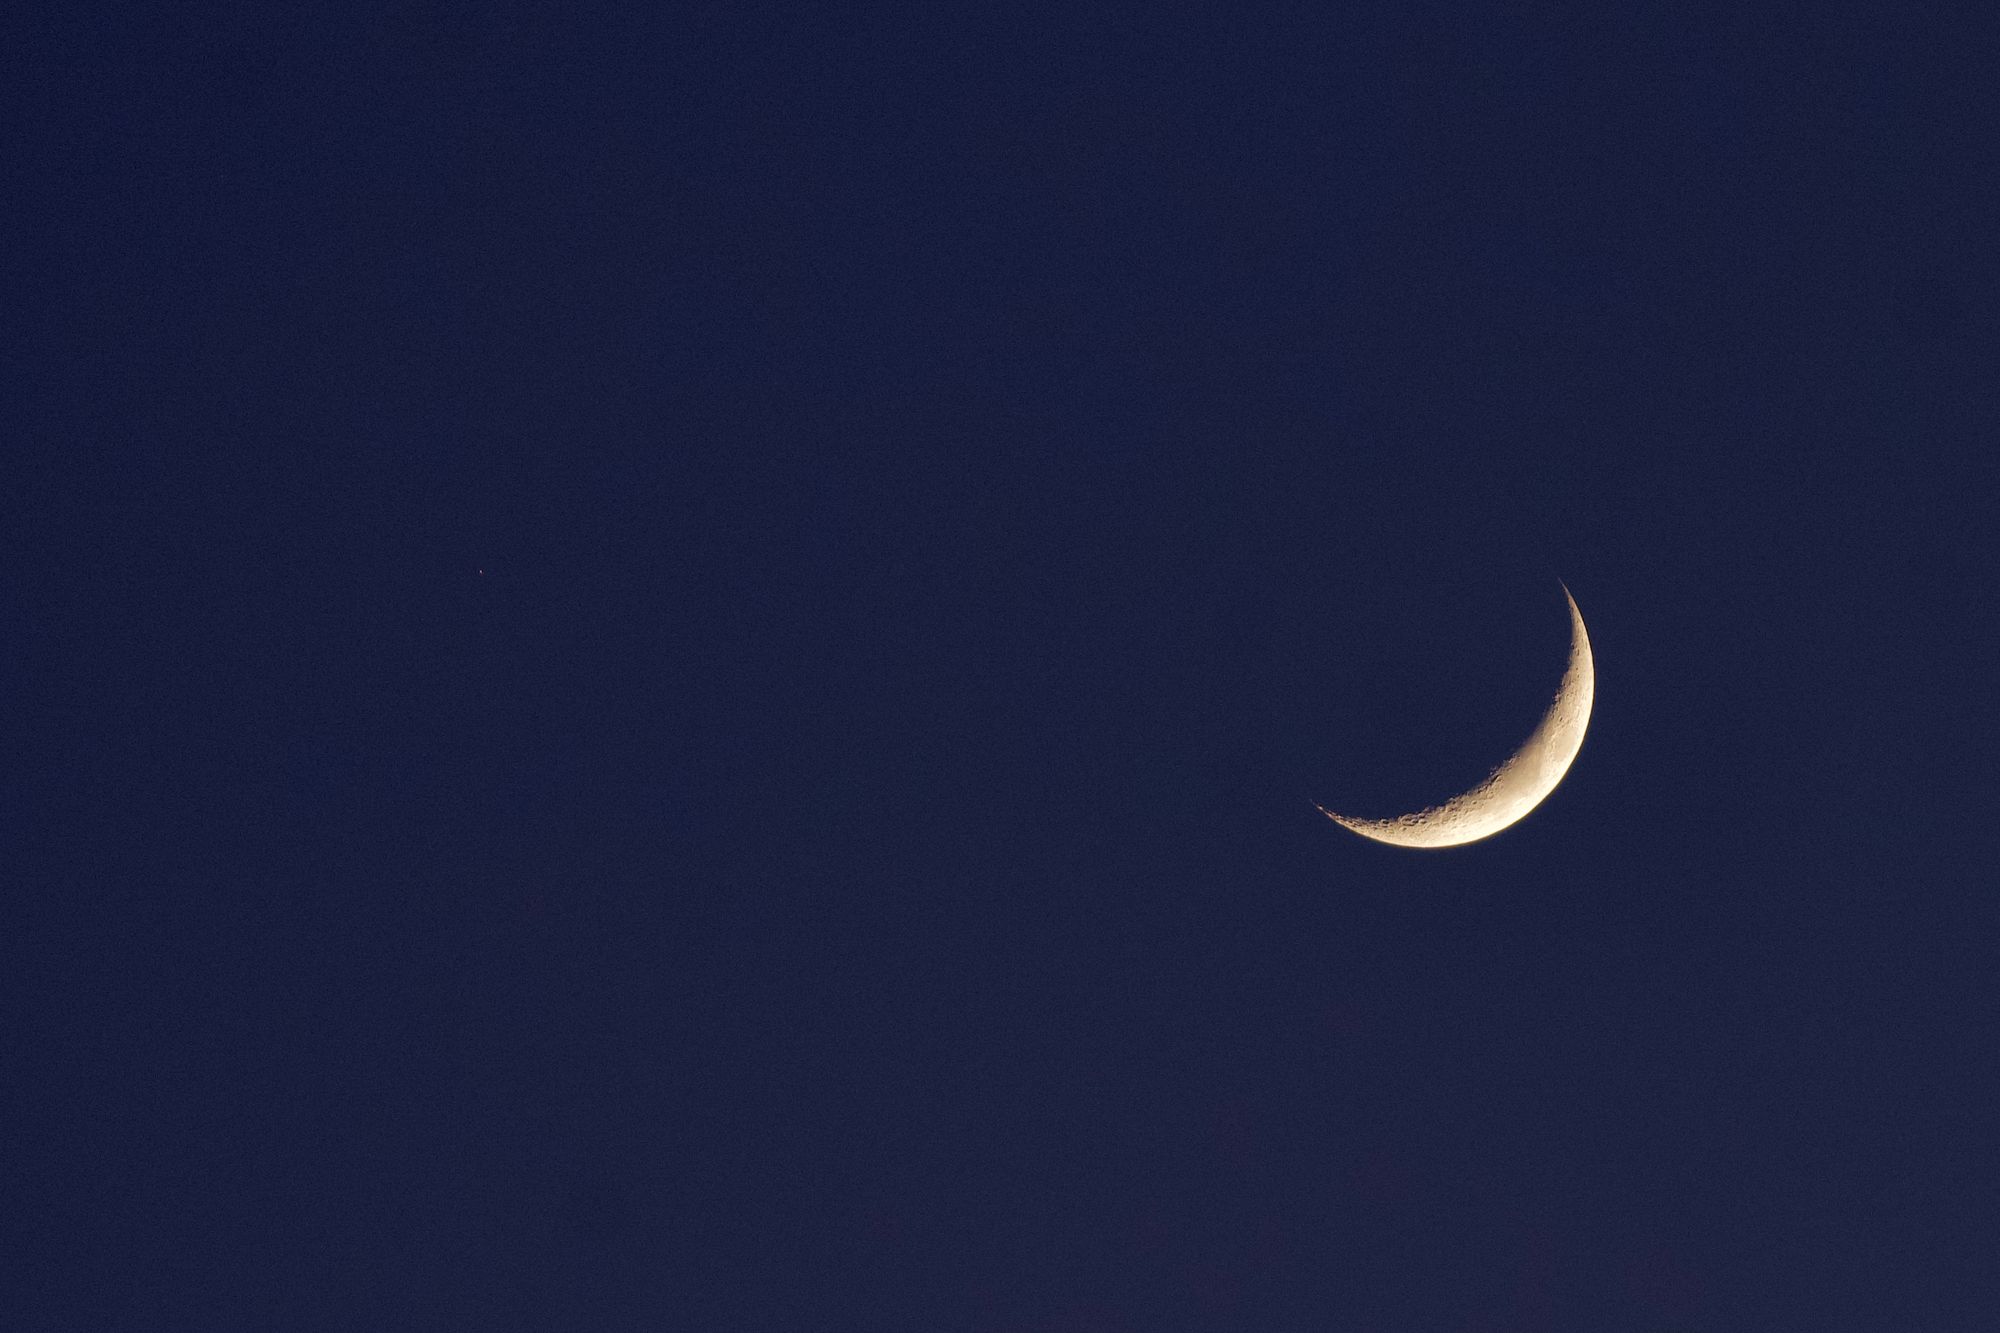 A photo of the waxing crescent moon seen against a dark blue sky near moonset.